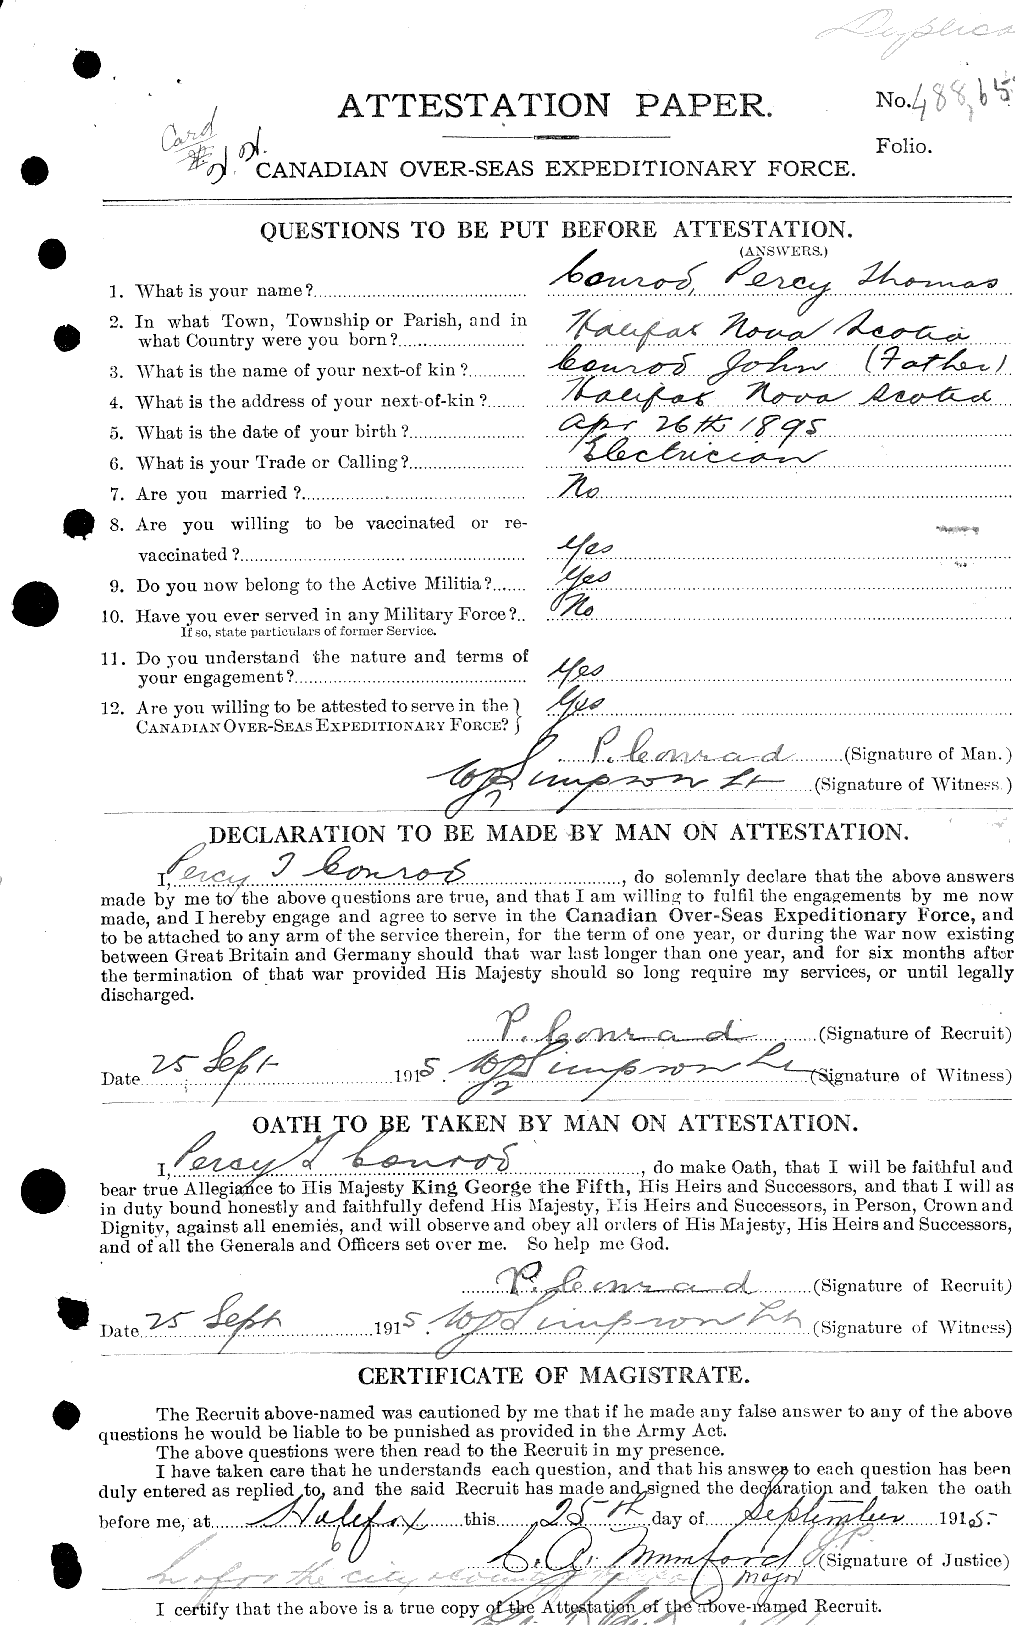 Personnel Records of the First World War - CEF 036146a